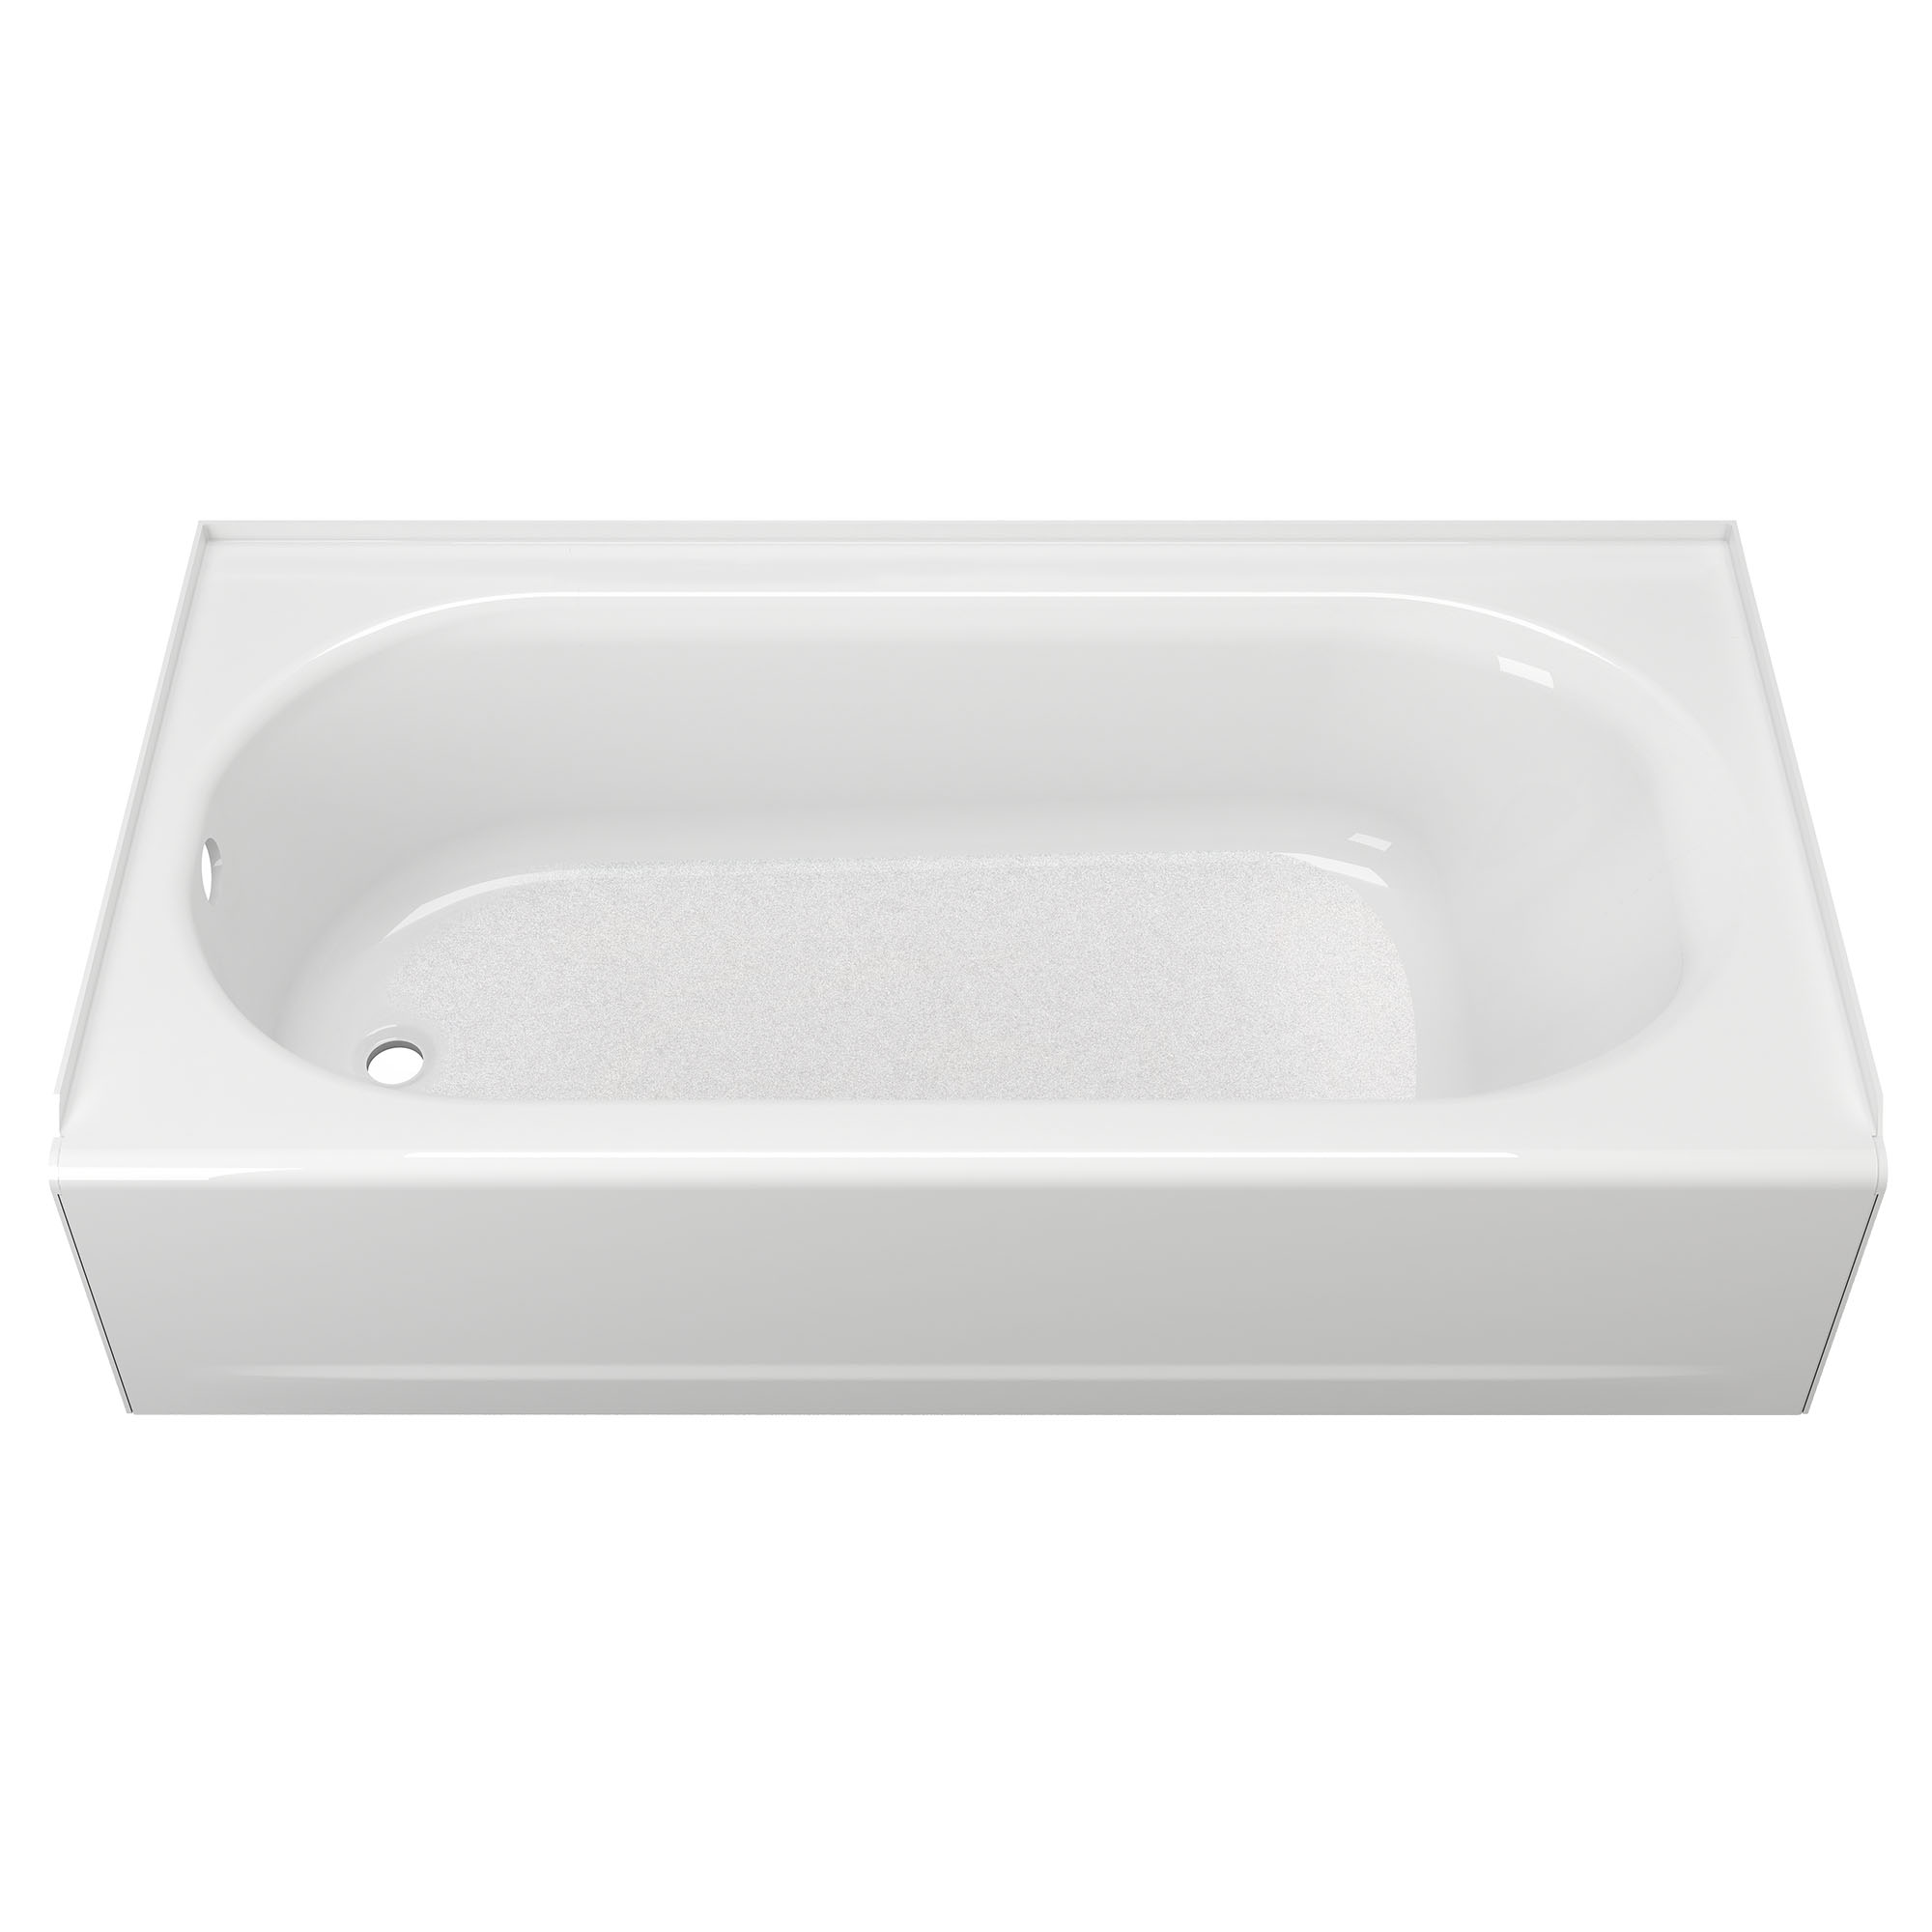 Princeton™ Americast™ 60 x 34-Inch Integral Apron Bathtub Above Floor Rough Left-Hand Outlet with Luxury Ledge